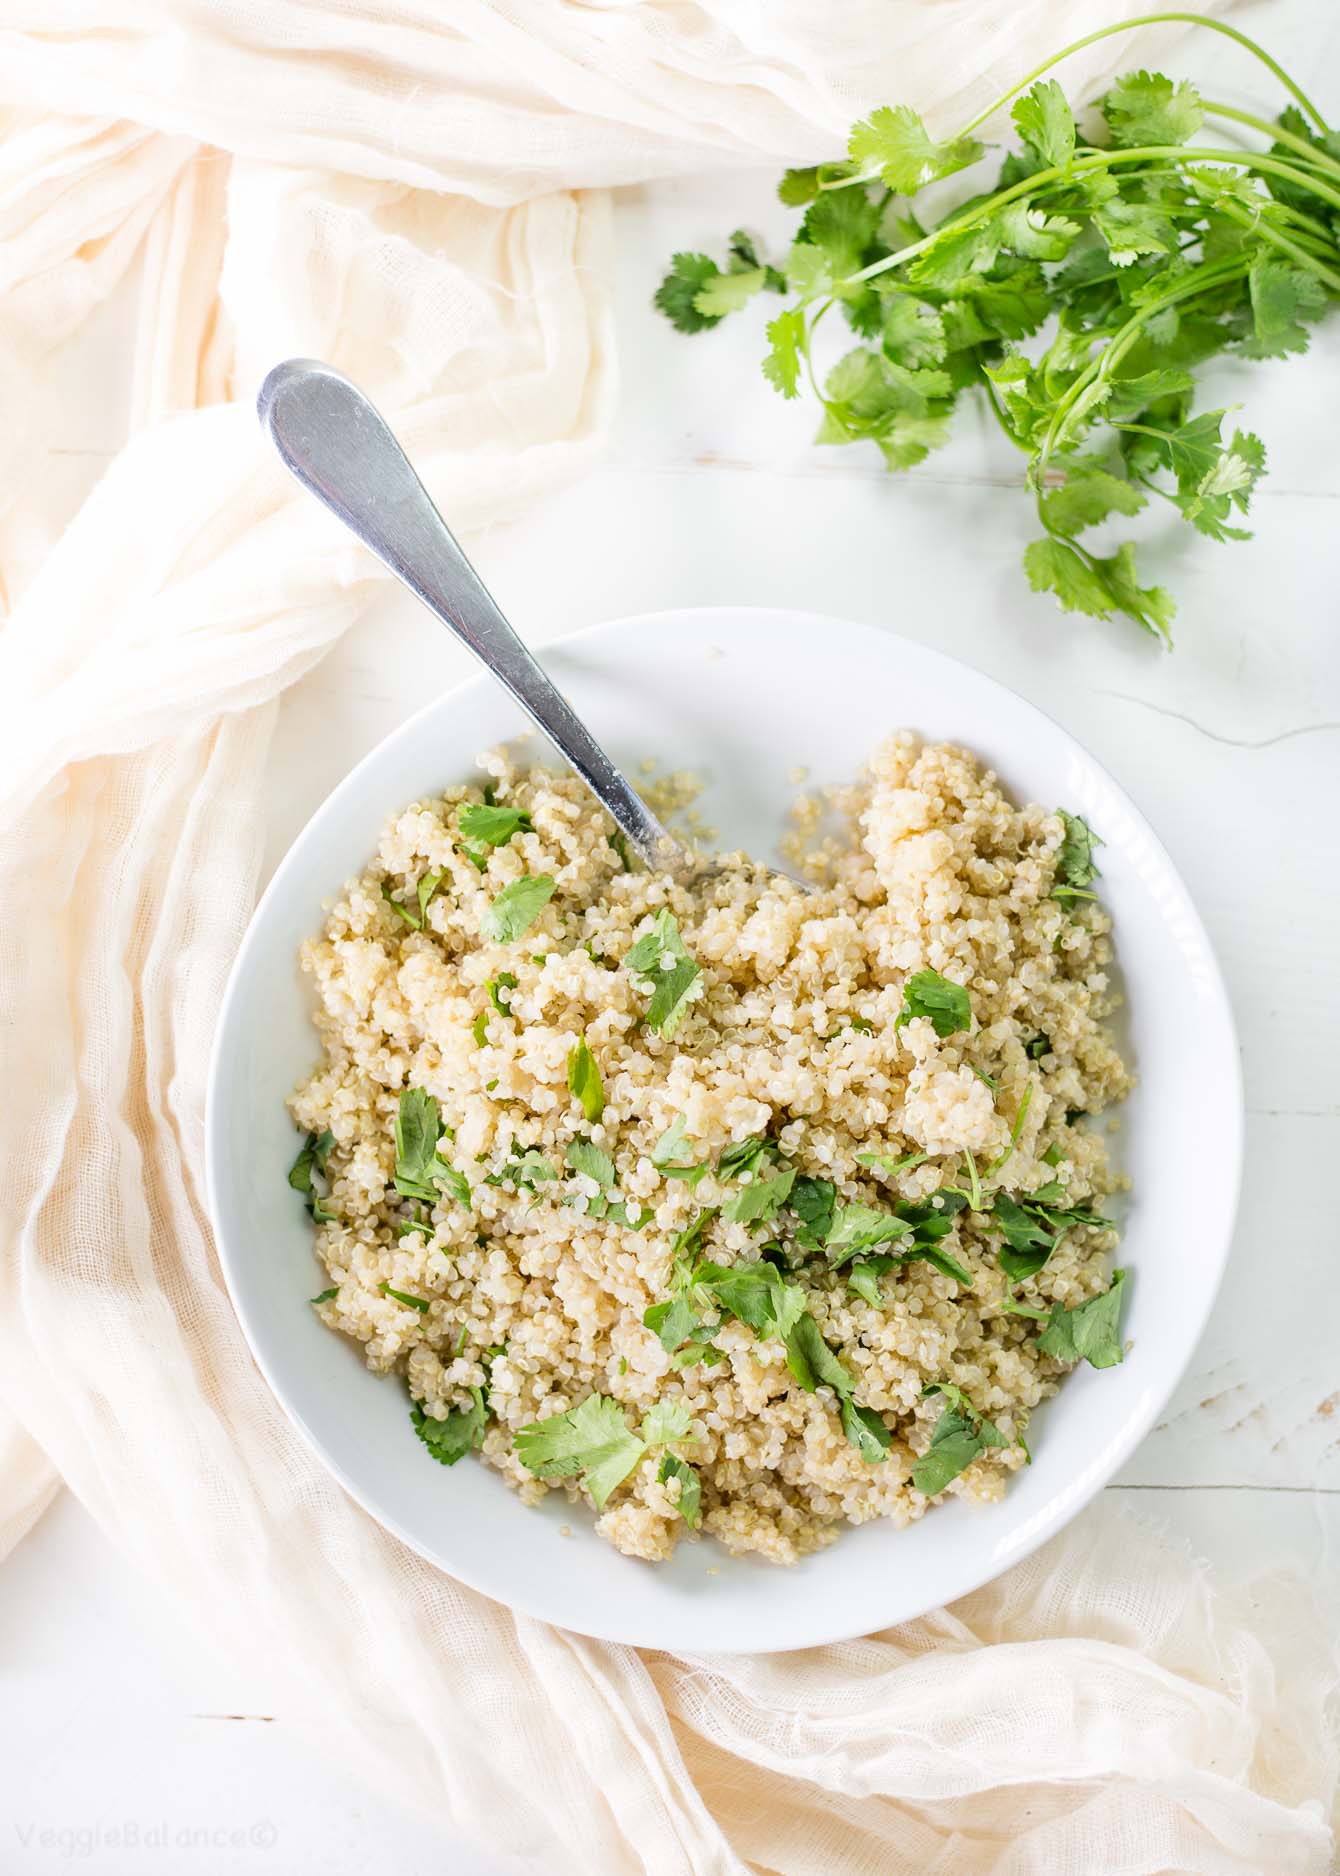 How to Make the Best Quinoa